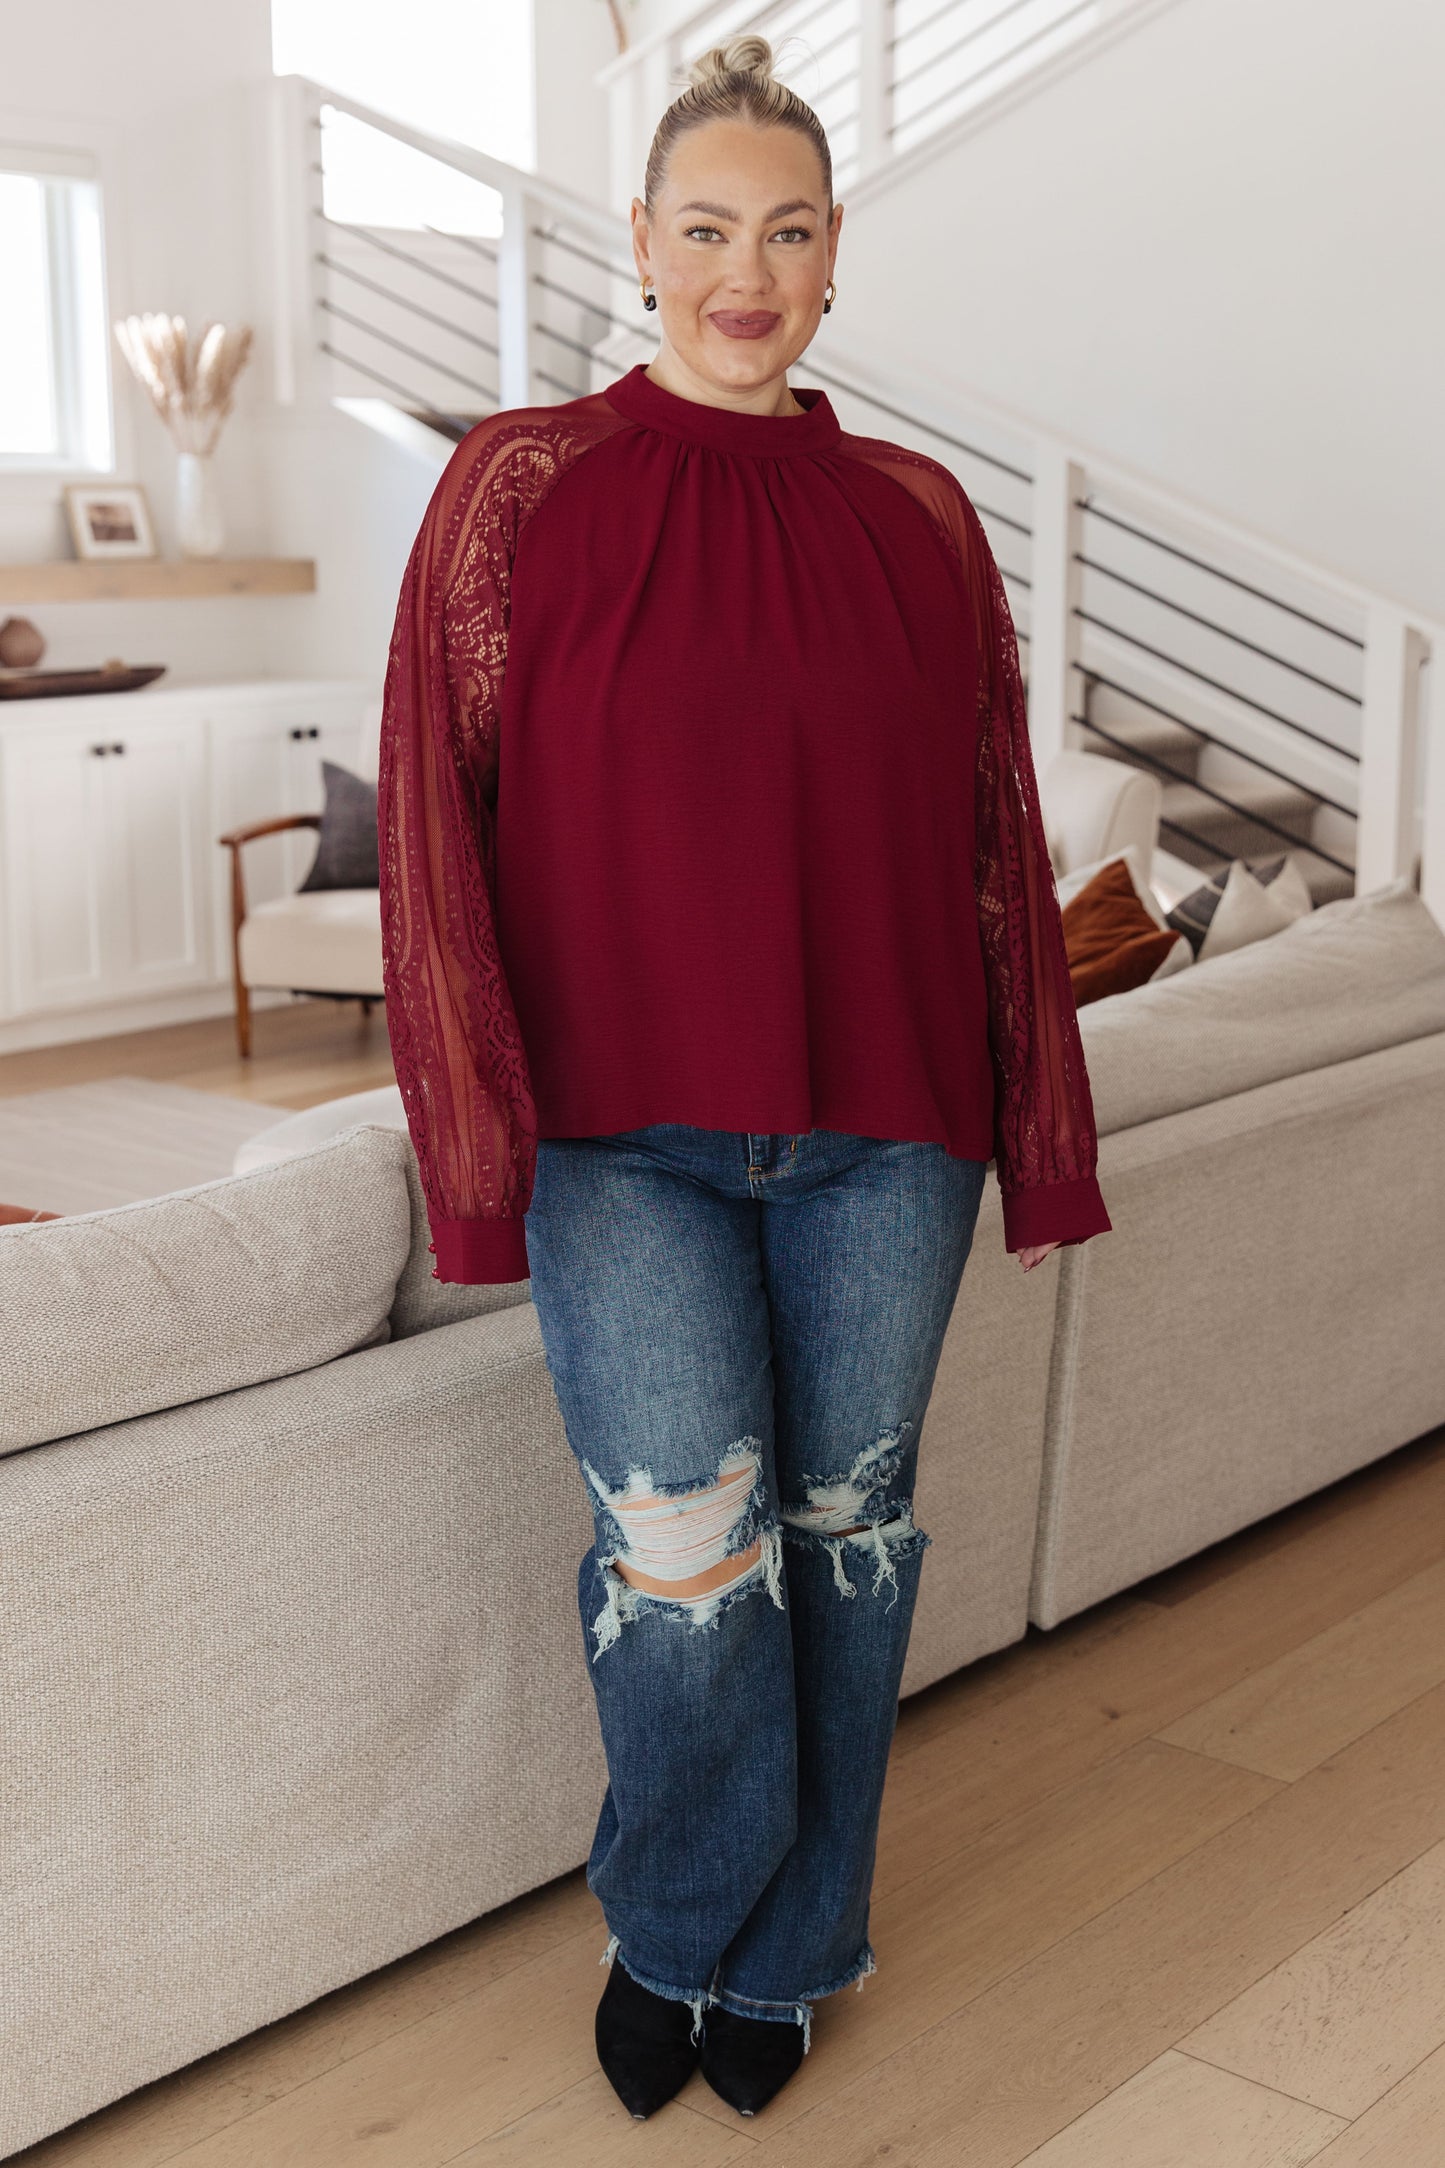 Lace on My Sleeves Blouse in Burgundy